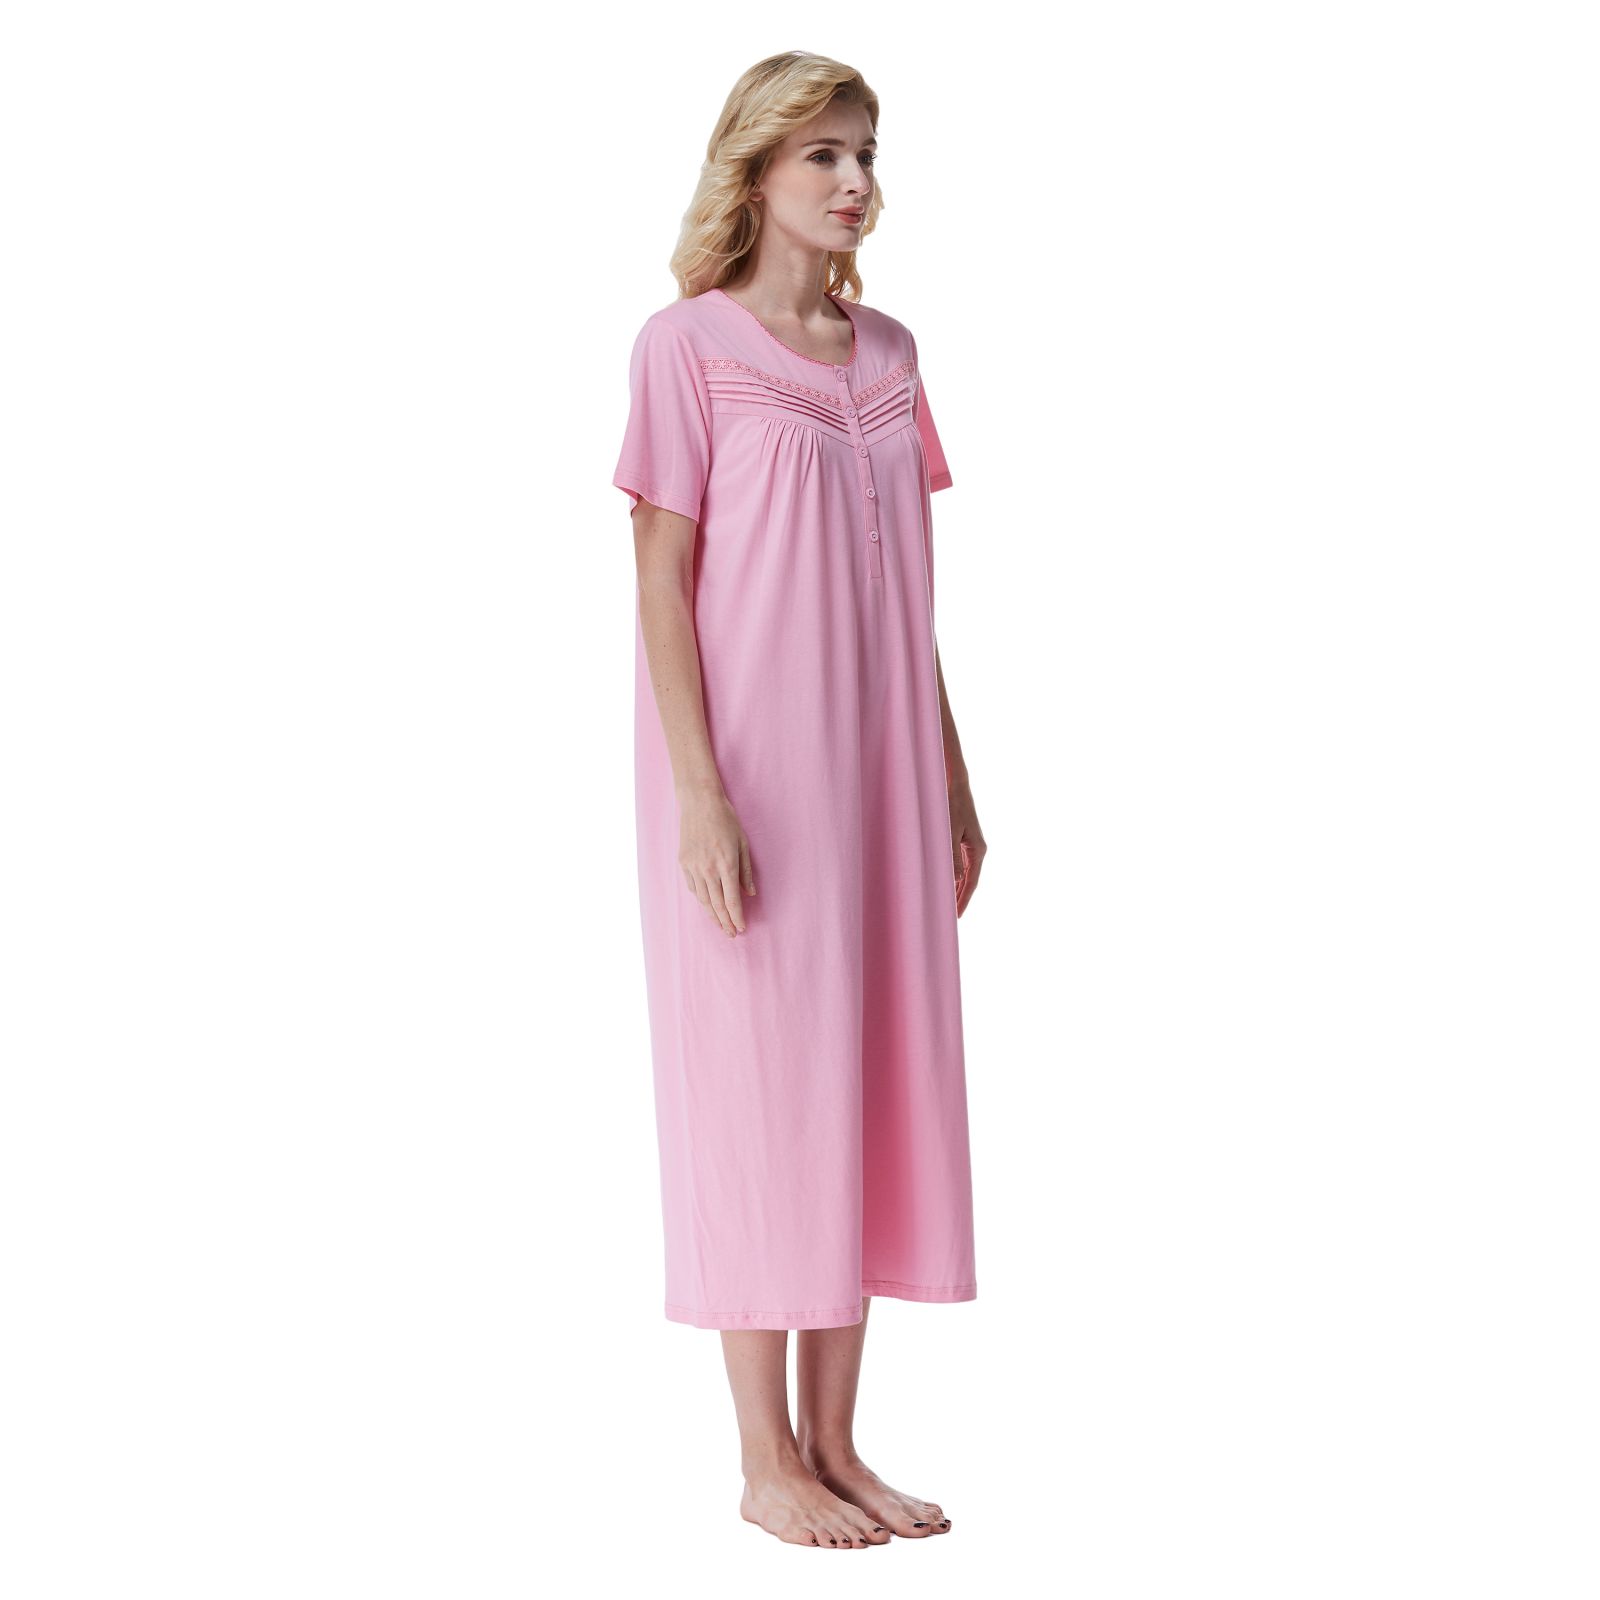 Nightgowns for Women 100% Cotton Short Sleeve Long Women's Nightgown or ...